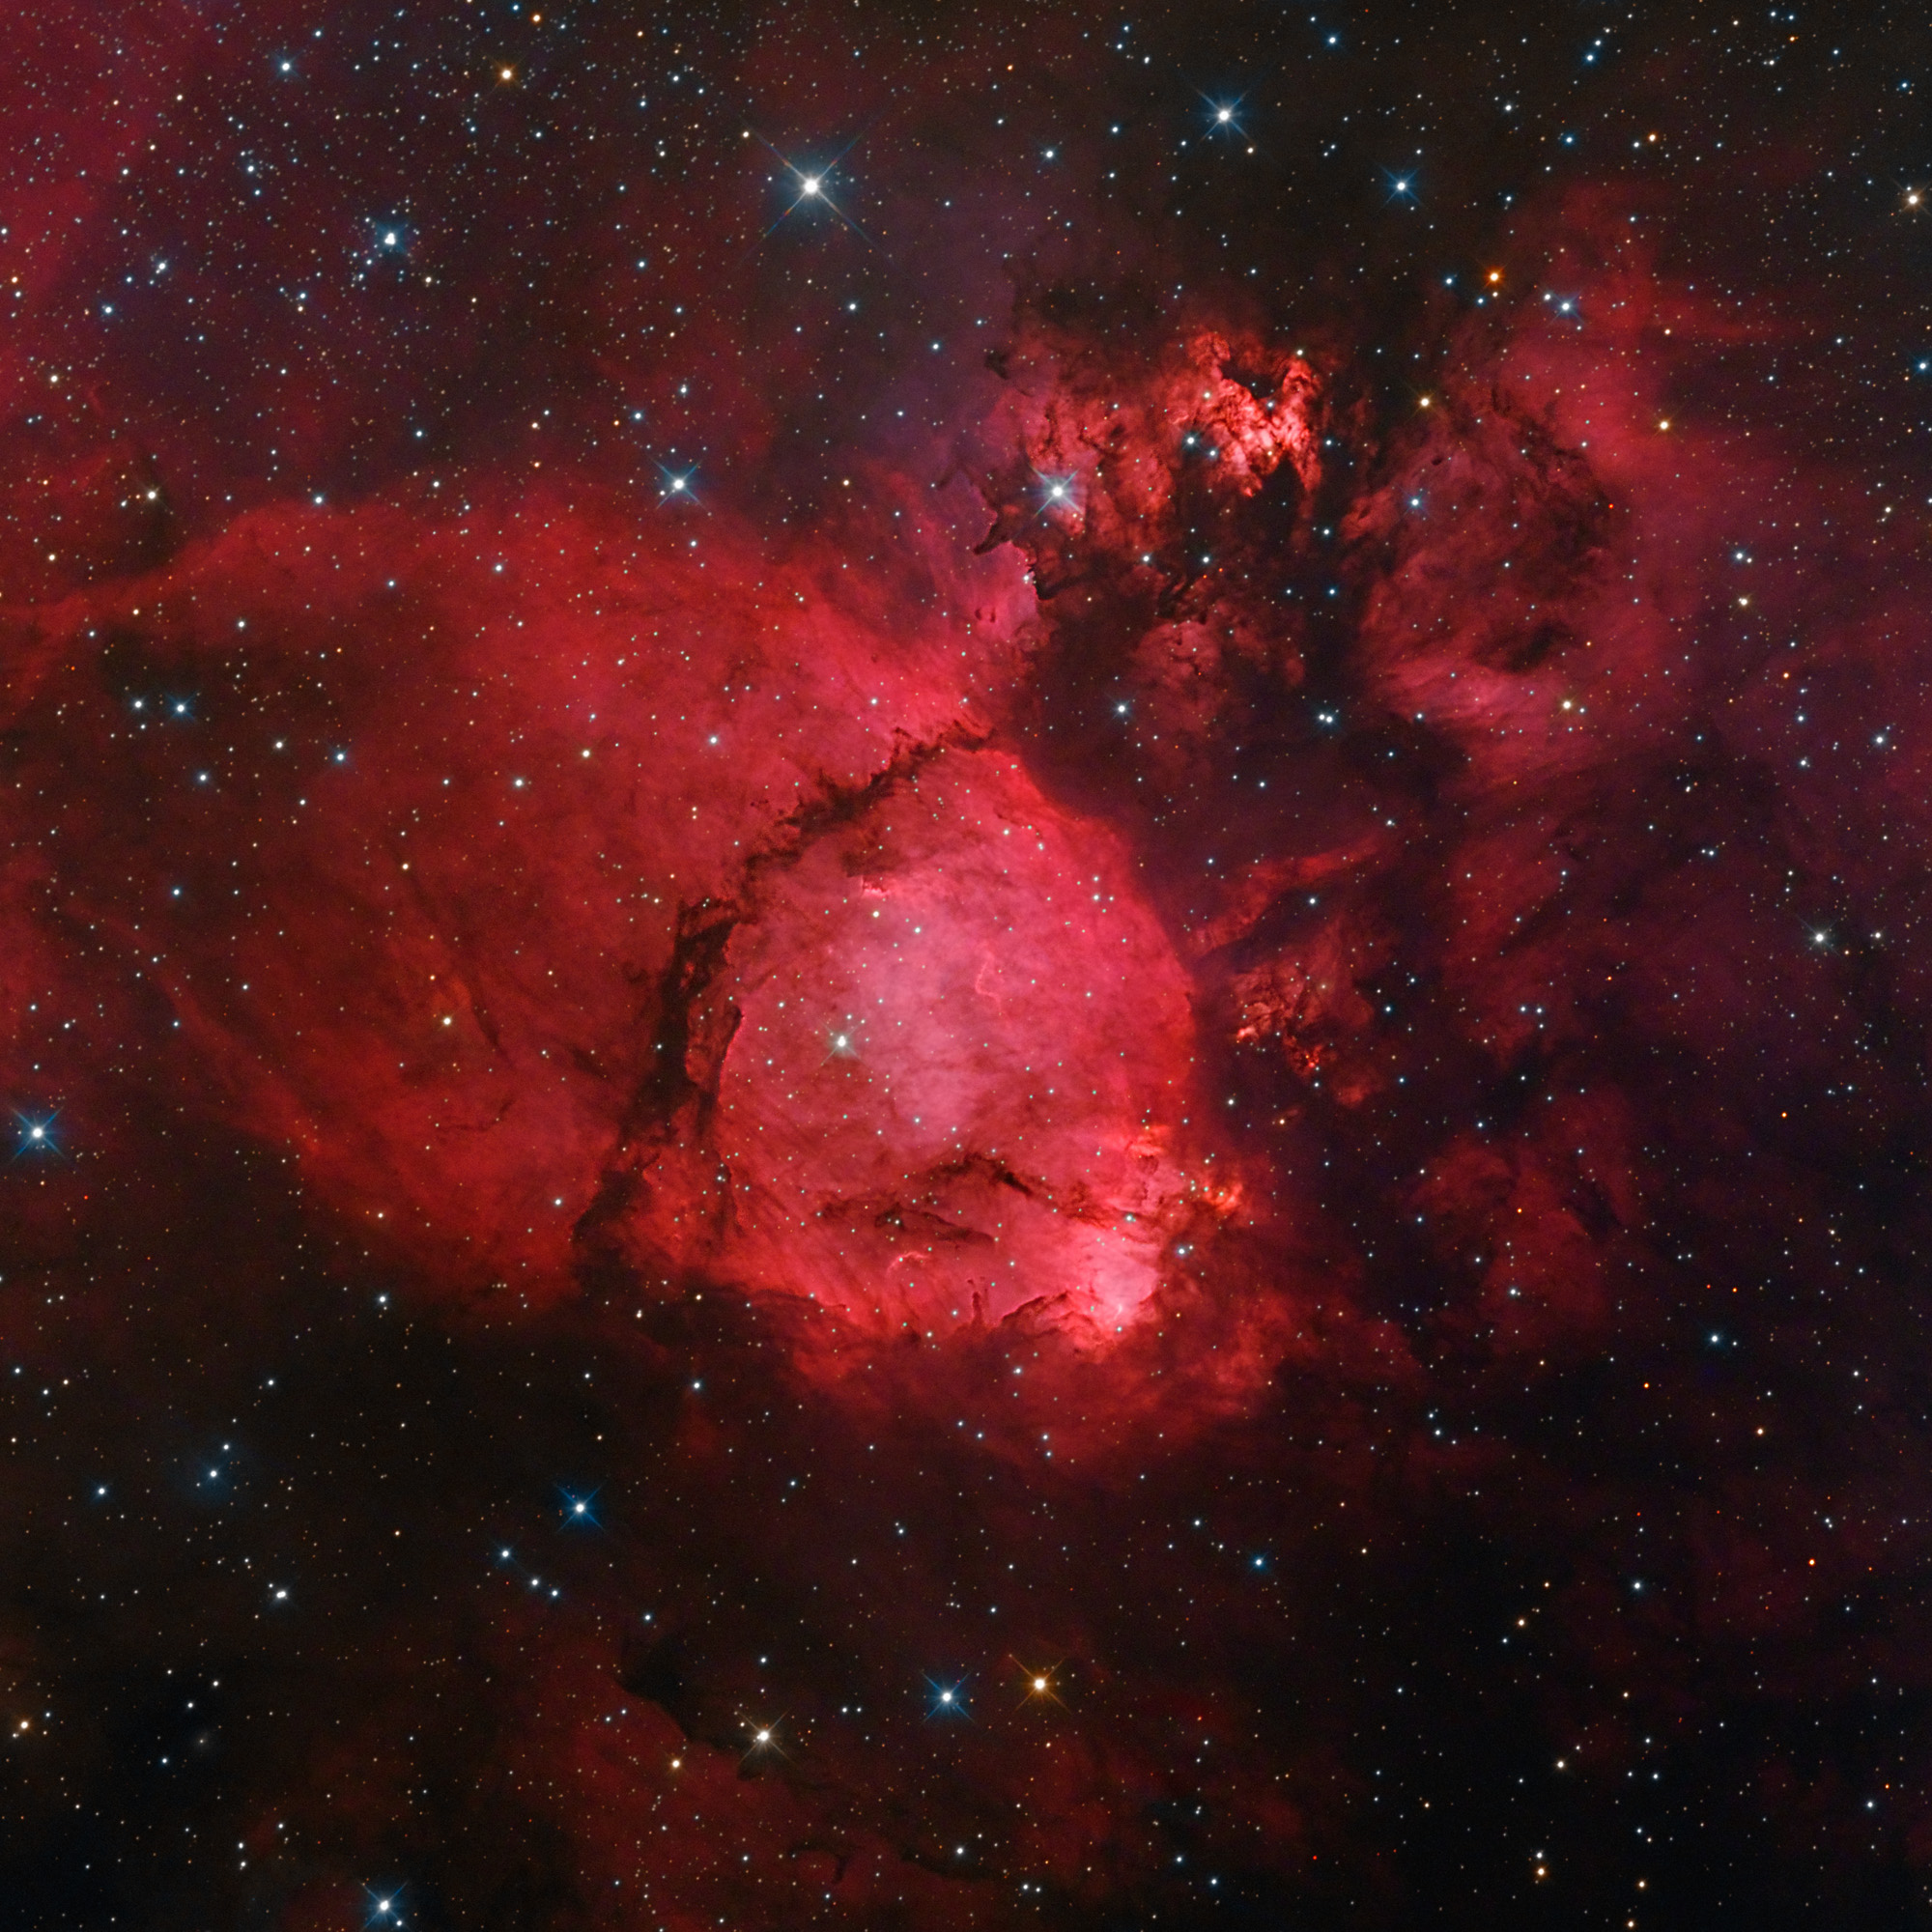 The Color of IC 1795